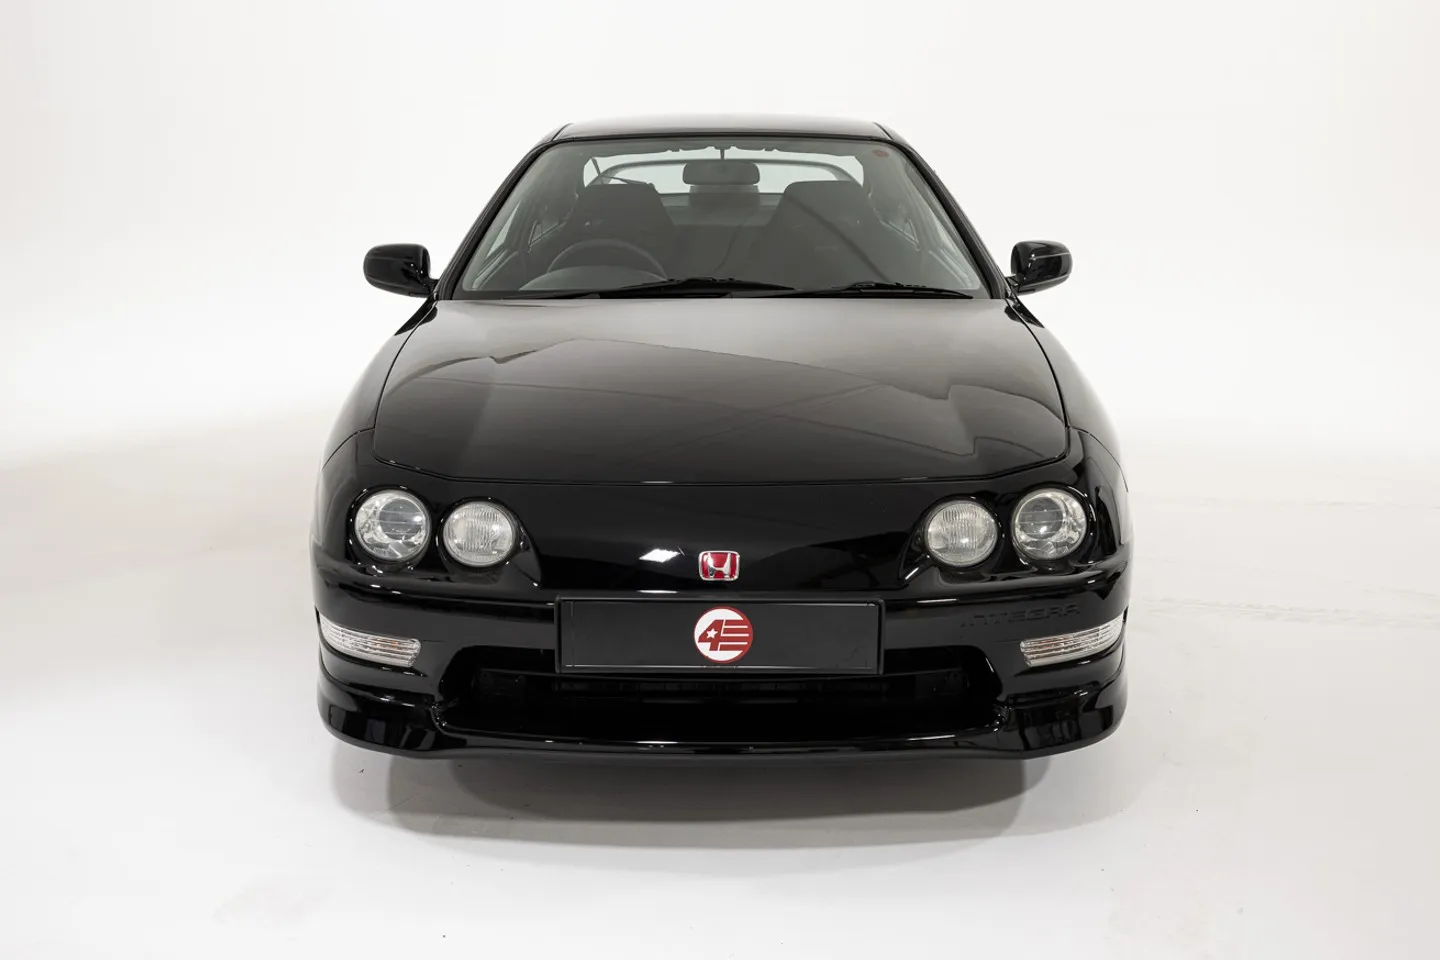 Is the £45,000 Price Tag Justified for This Immaculate Honda Integra Type R?